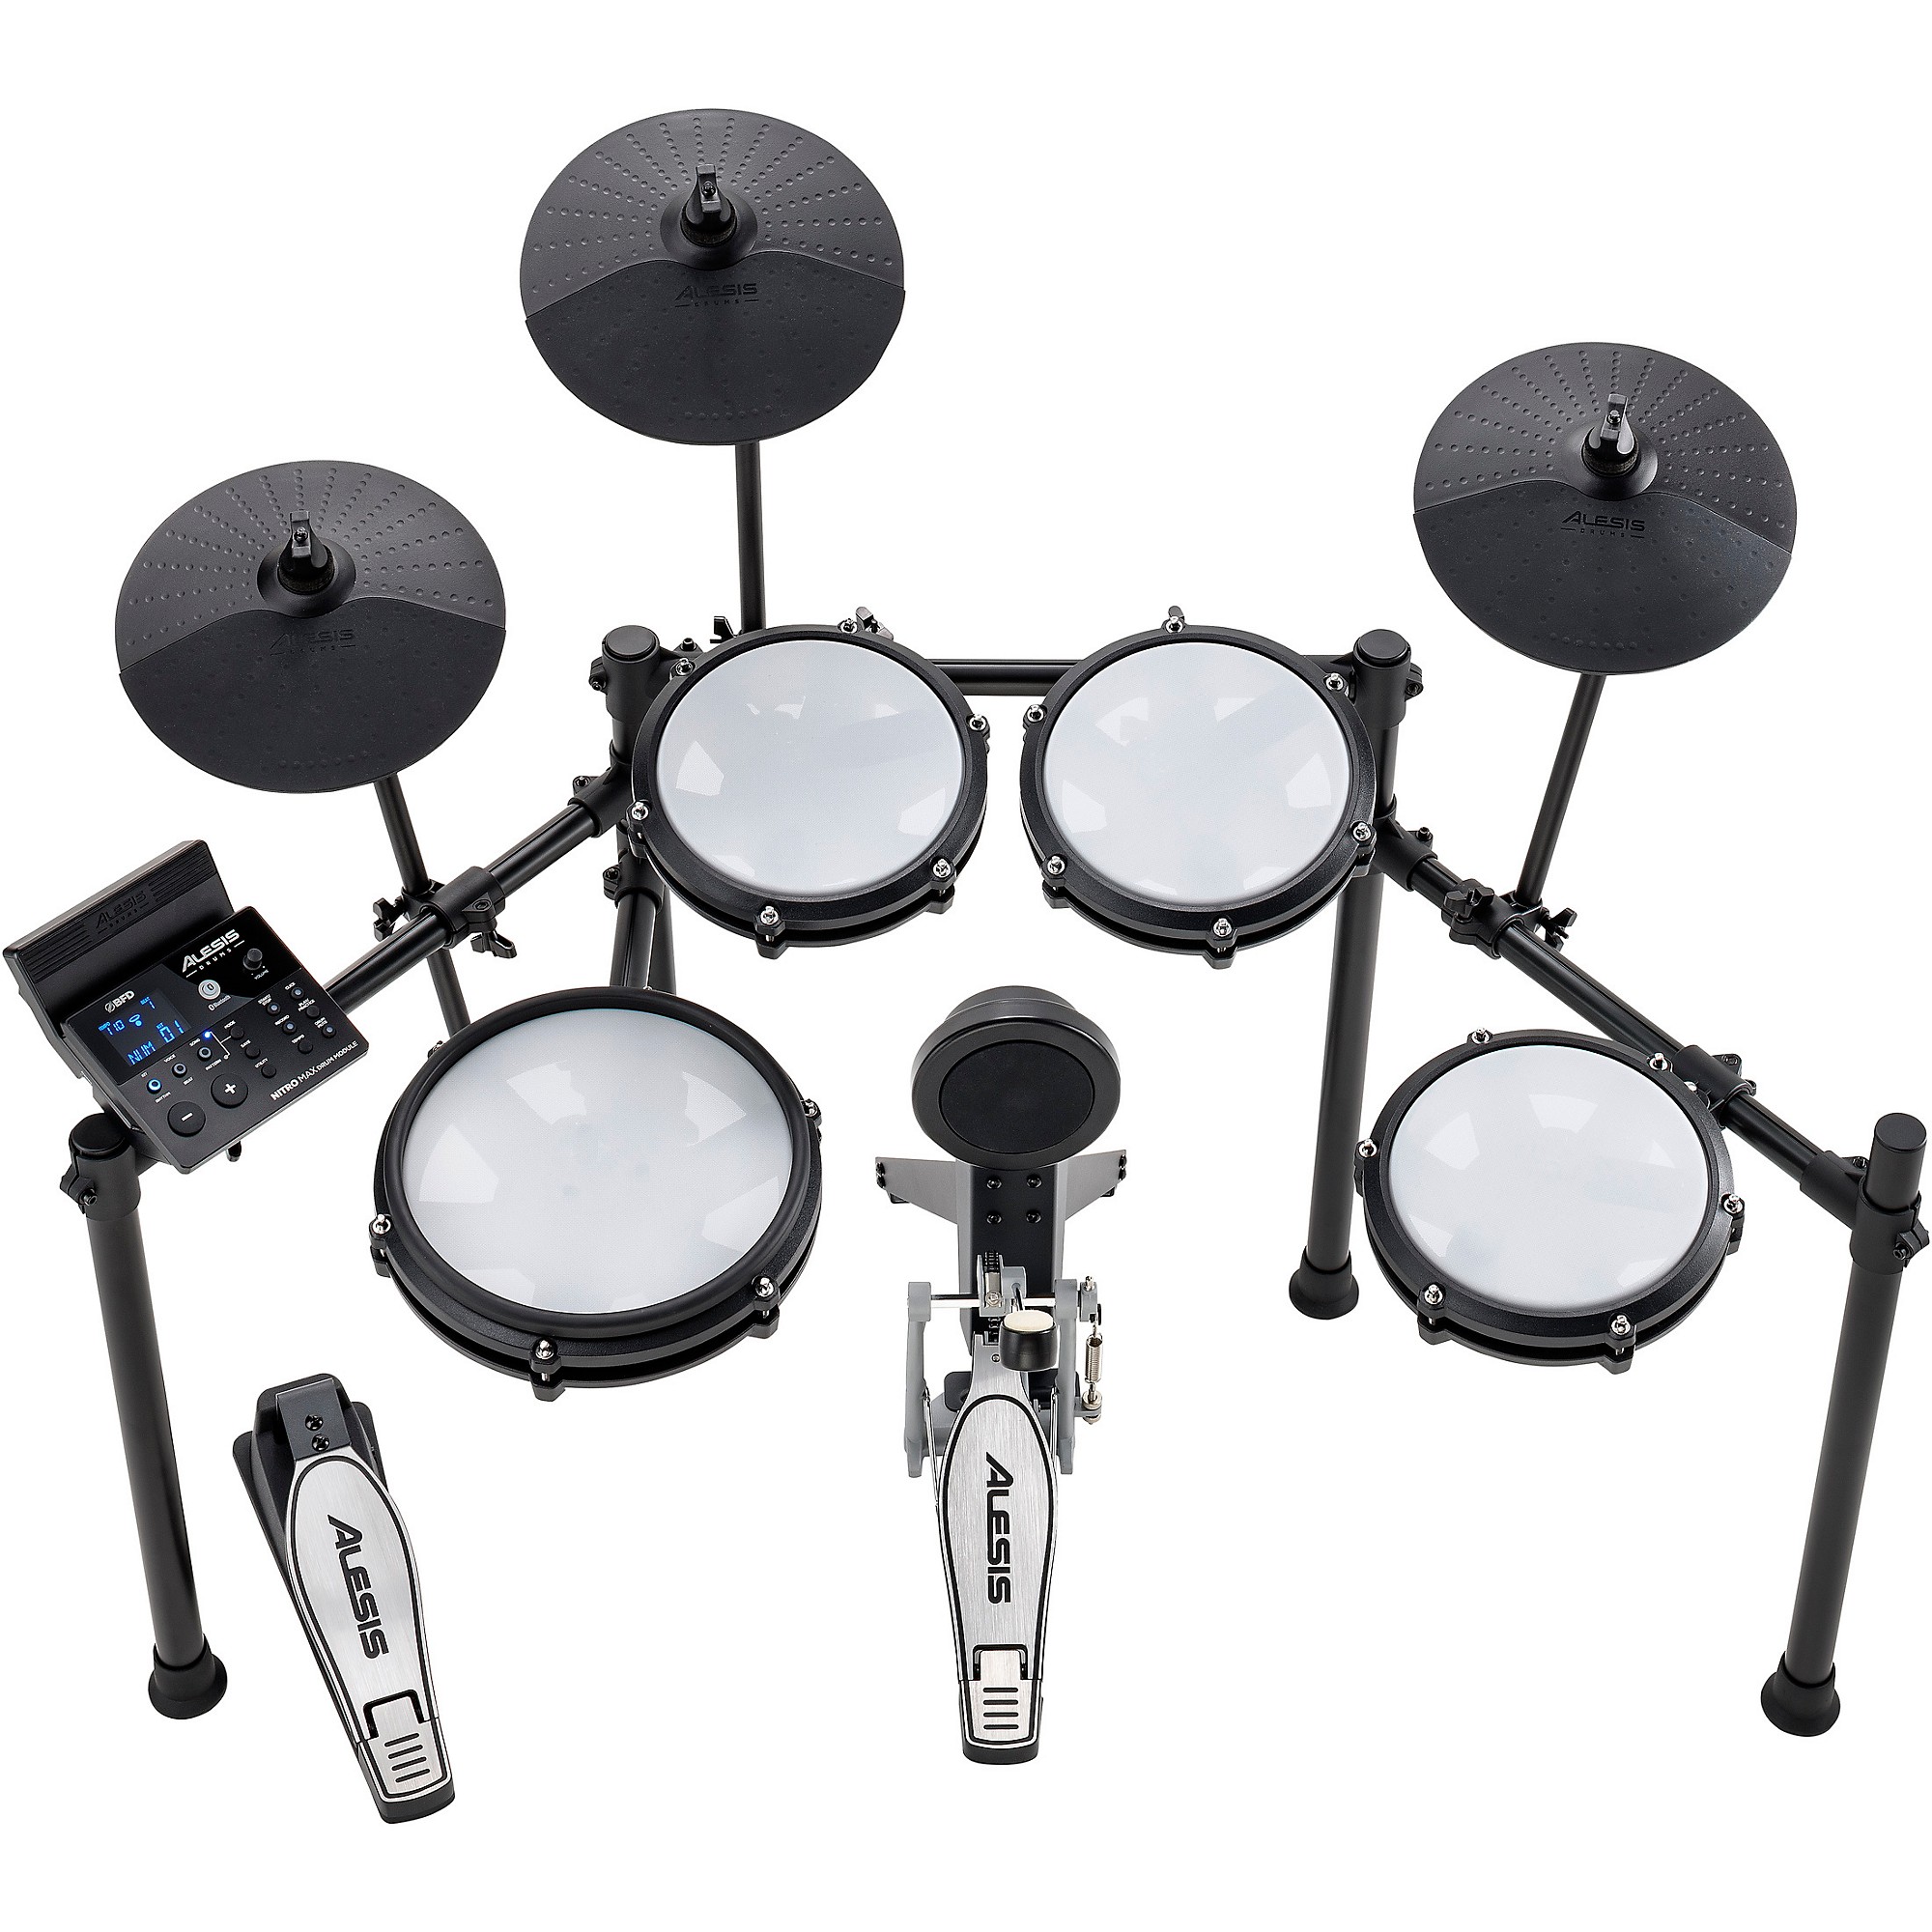 Alesis Nitro Mesh Kit 8-Piece Compact Drum Kit with 300+ Sounds, Kick  Pedal, and Drum Rack - Bill's Music